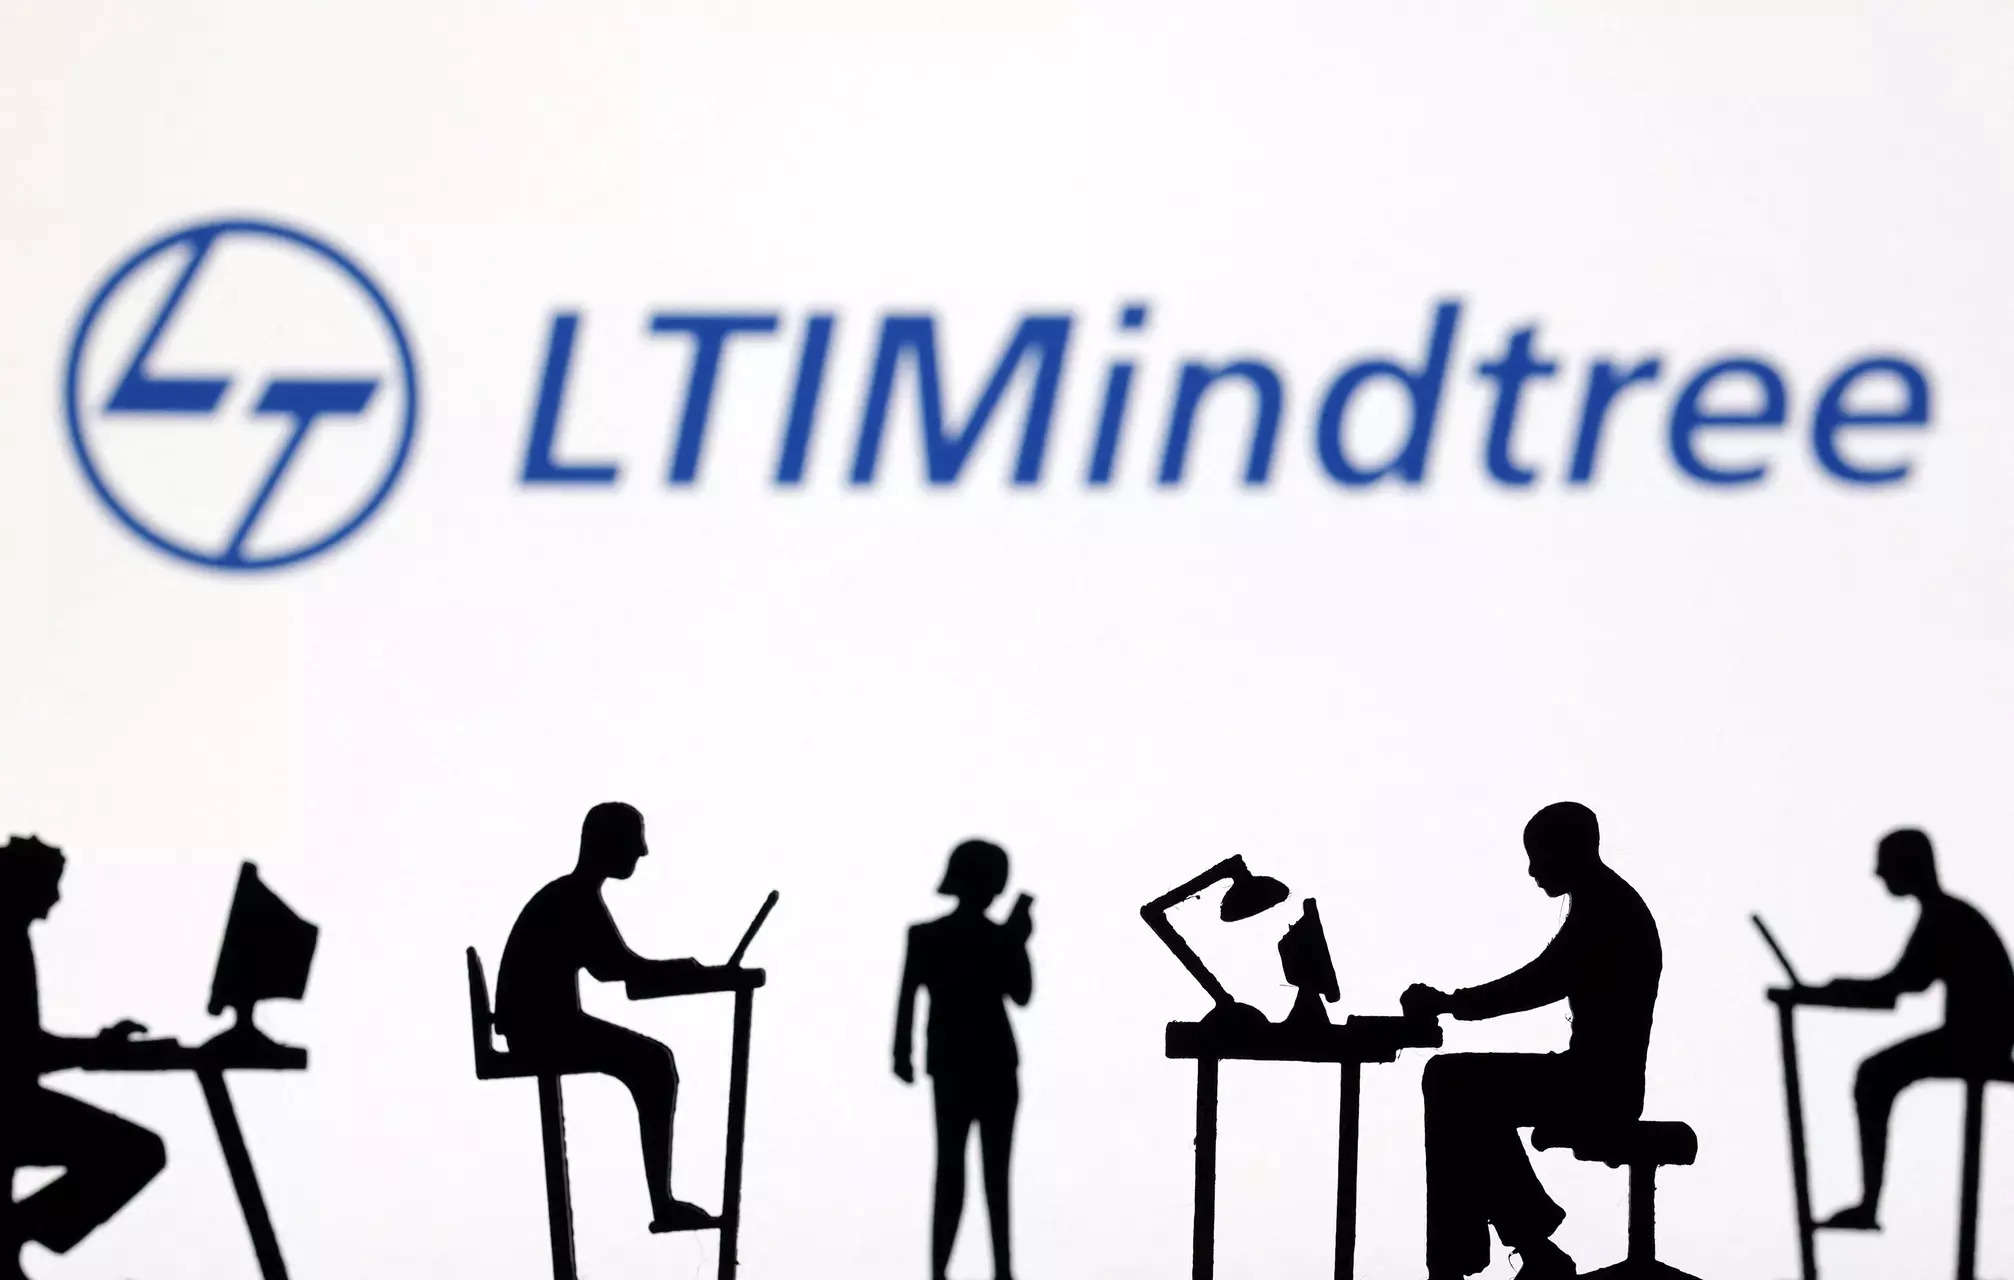 LTIMindtree results performance